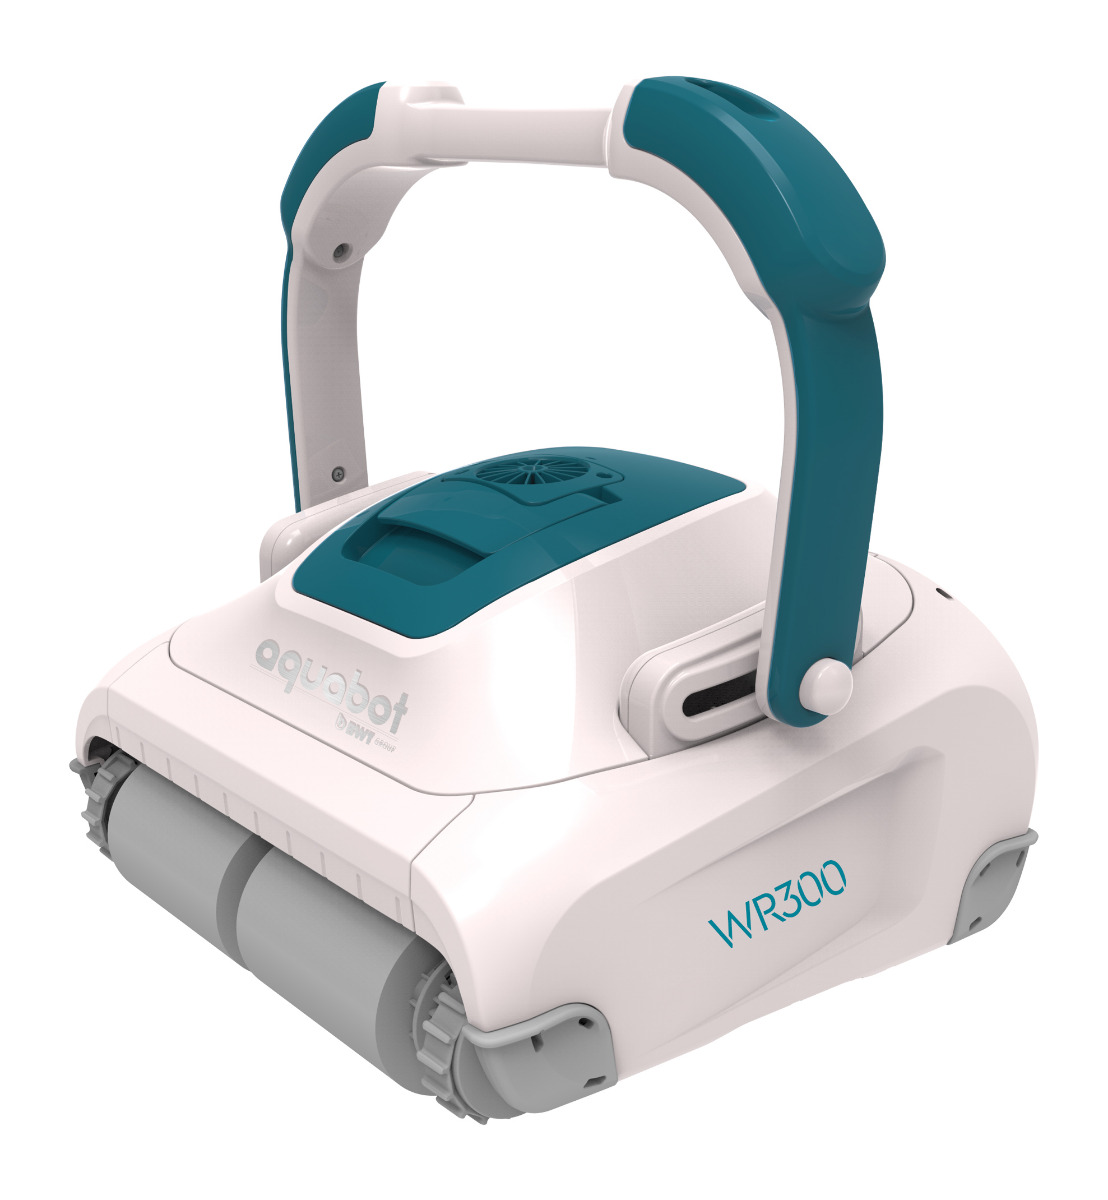 Aquabot WR 300 robotic pool cleaner for pools up to 80 square meters (80 square meters).